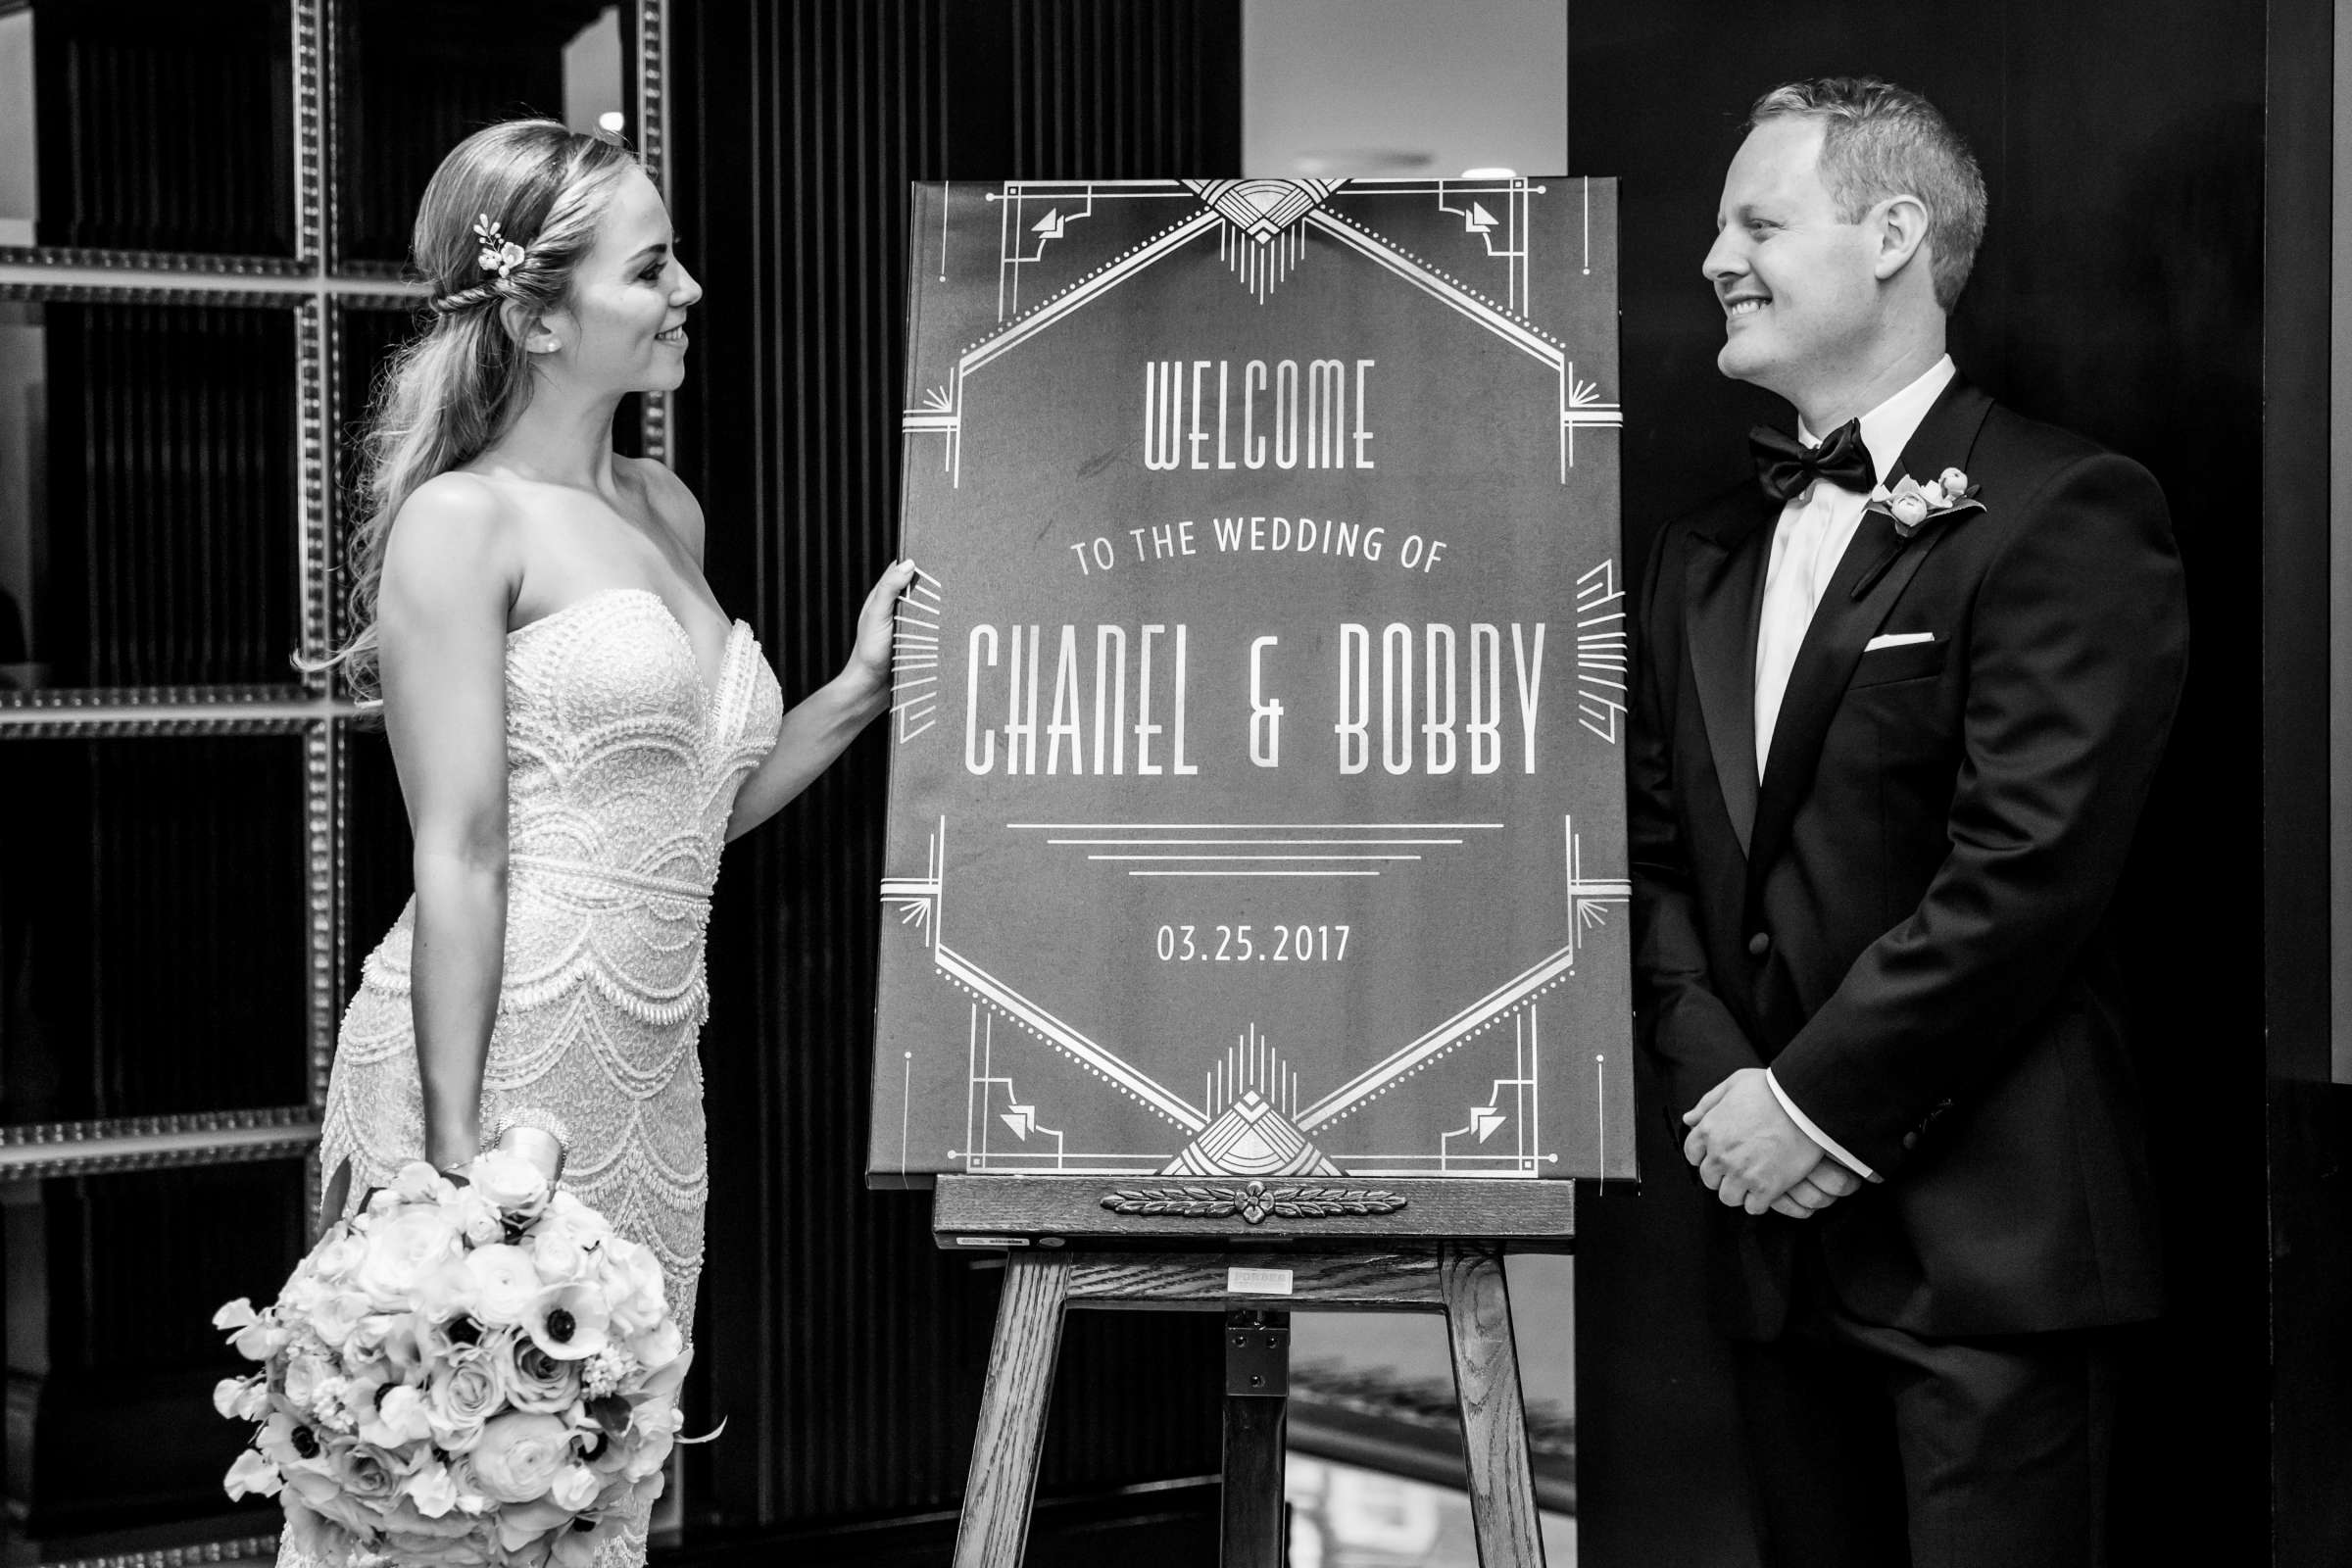 US Grant Wedding coordinated by Monarch Weddings, Chanel and Bobby Wedding Photo #346840 by True Photography